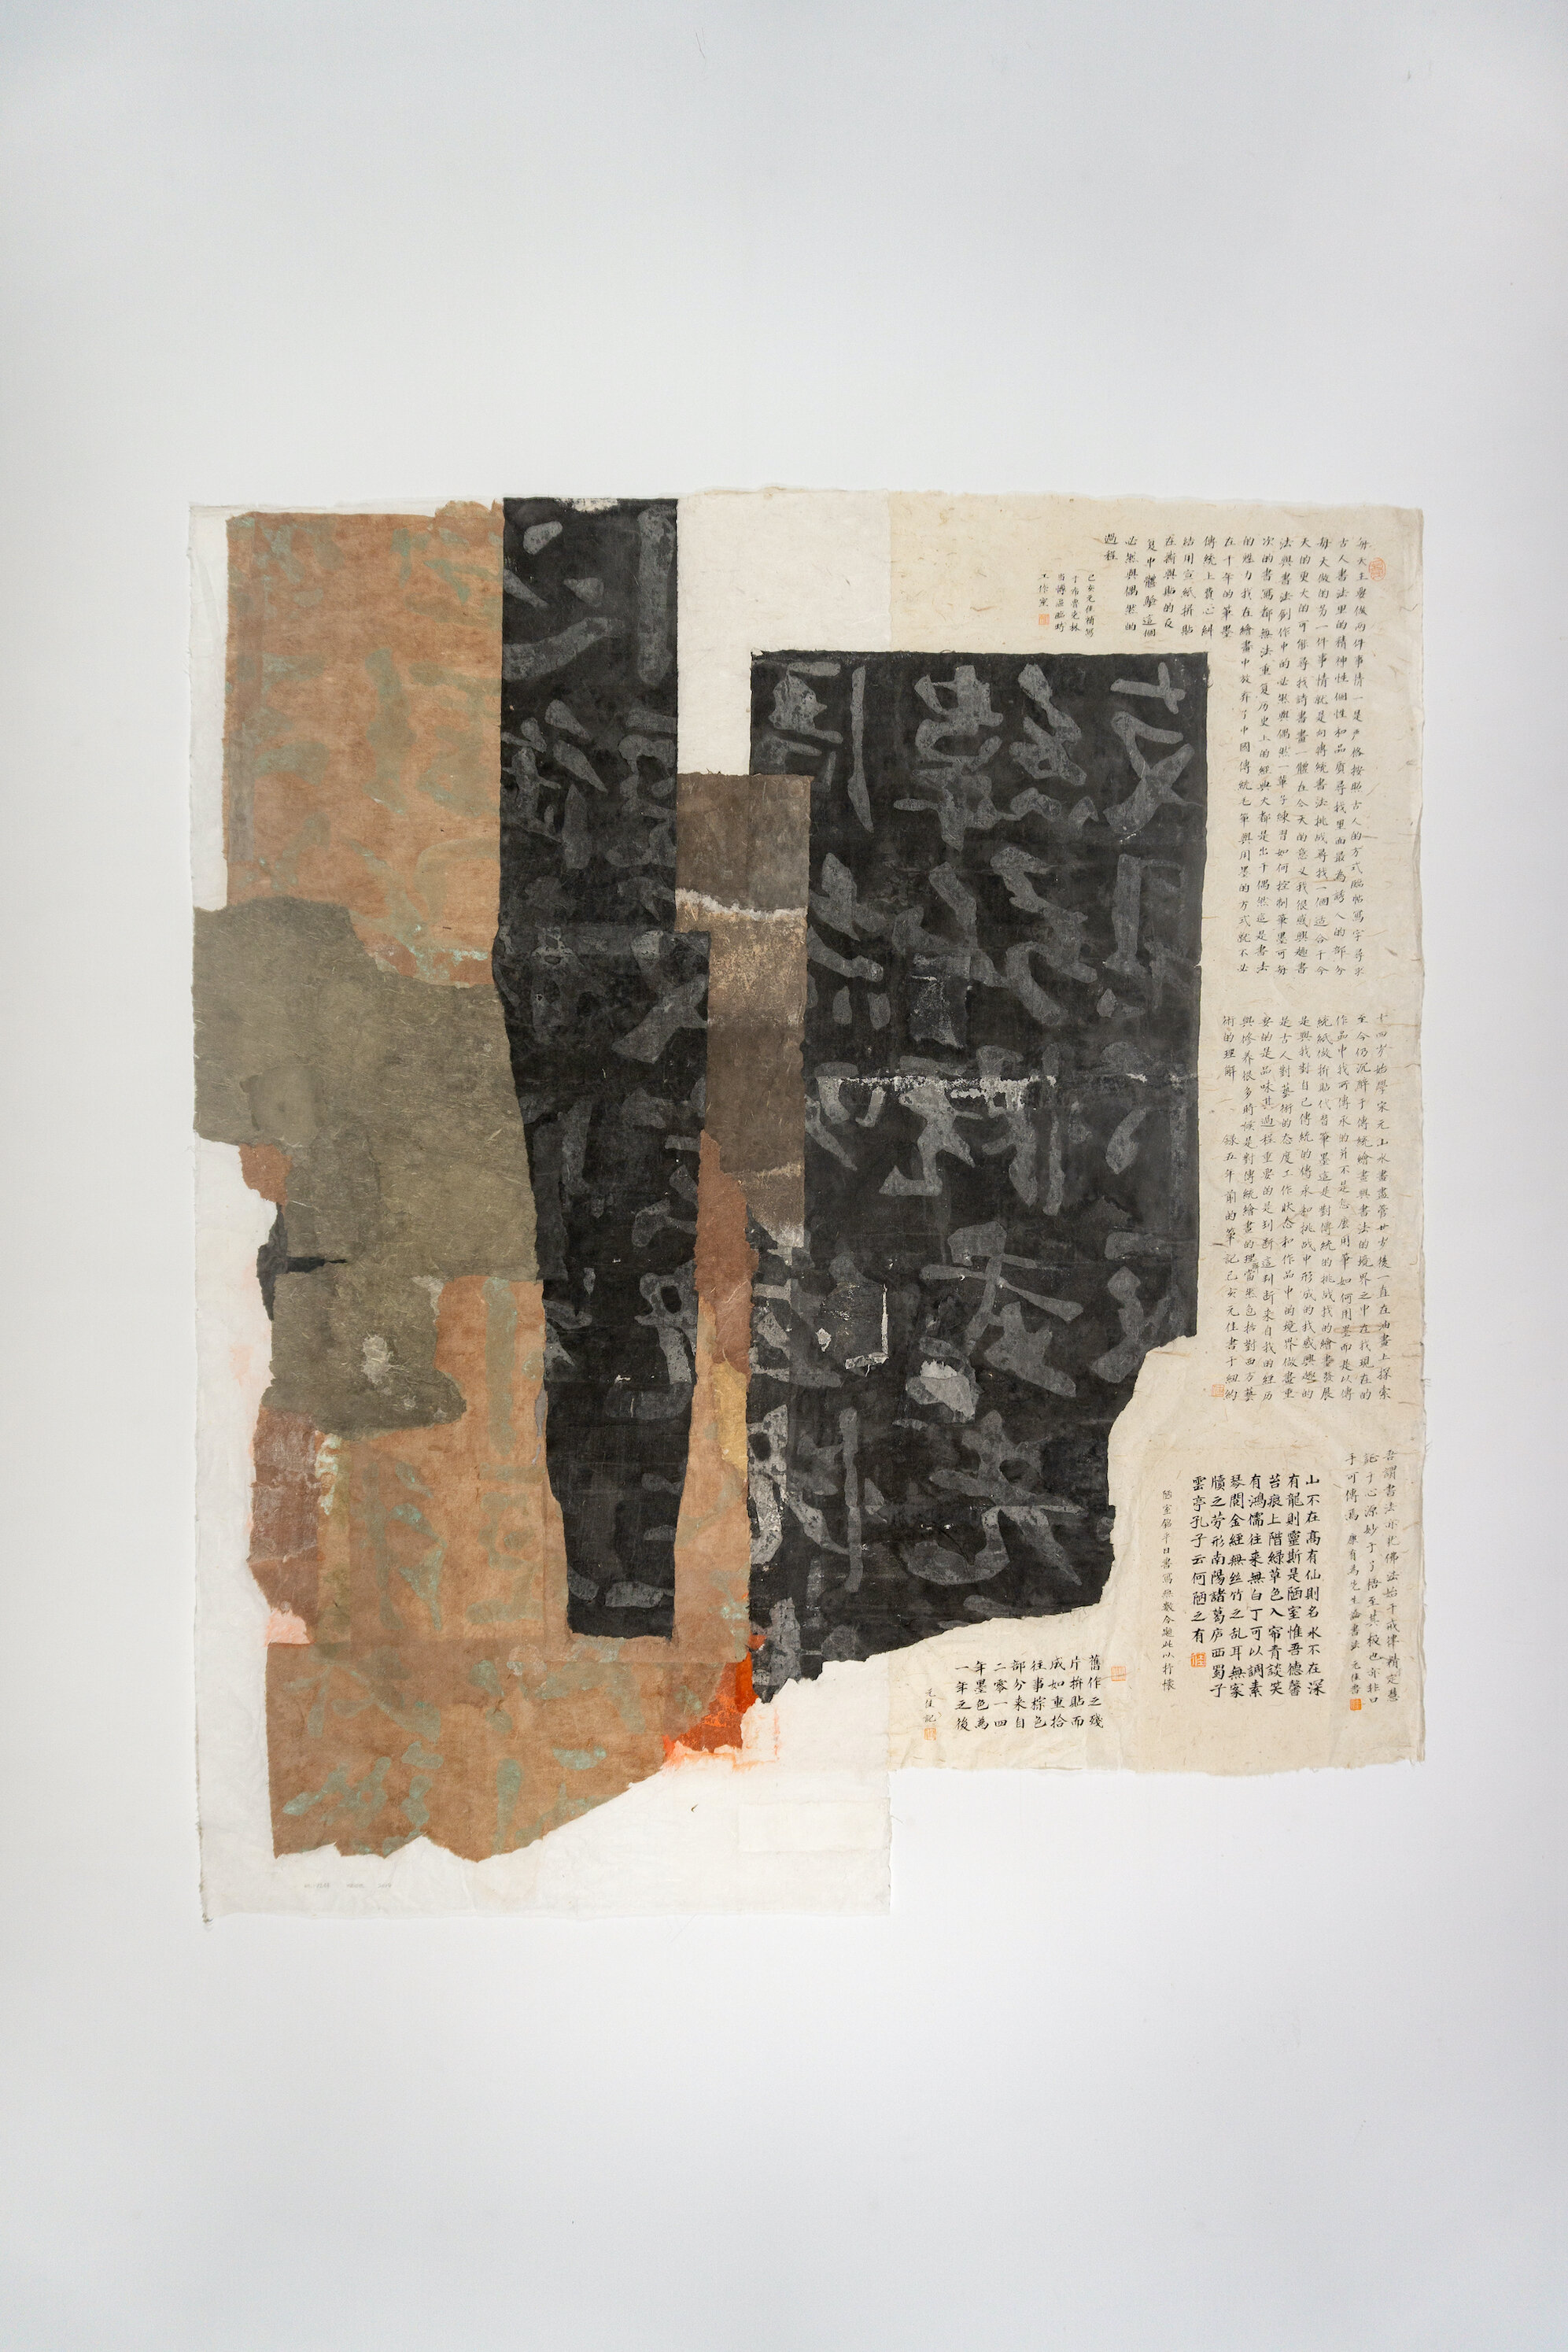  Wei Jia,  No. 19248,  2019. Gouache, ink and Xuan paper, collage on paper, 55 x 47 7/8 inches ©Wei Jia, courtesy Fou Gallery   